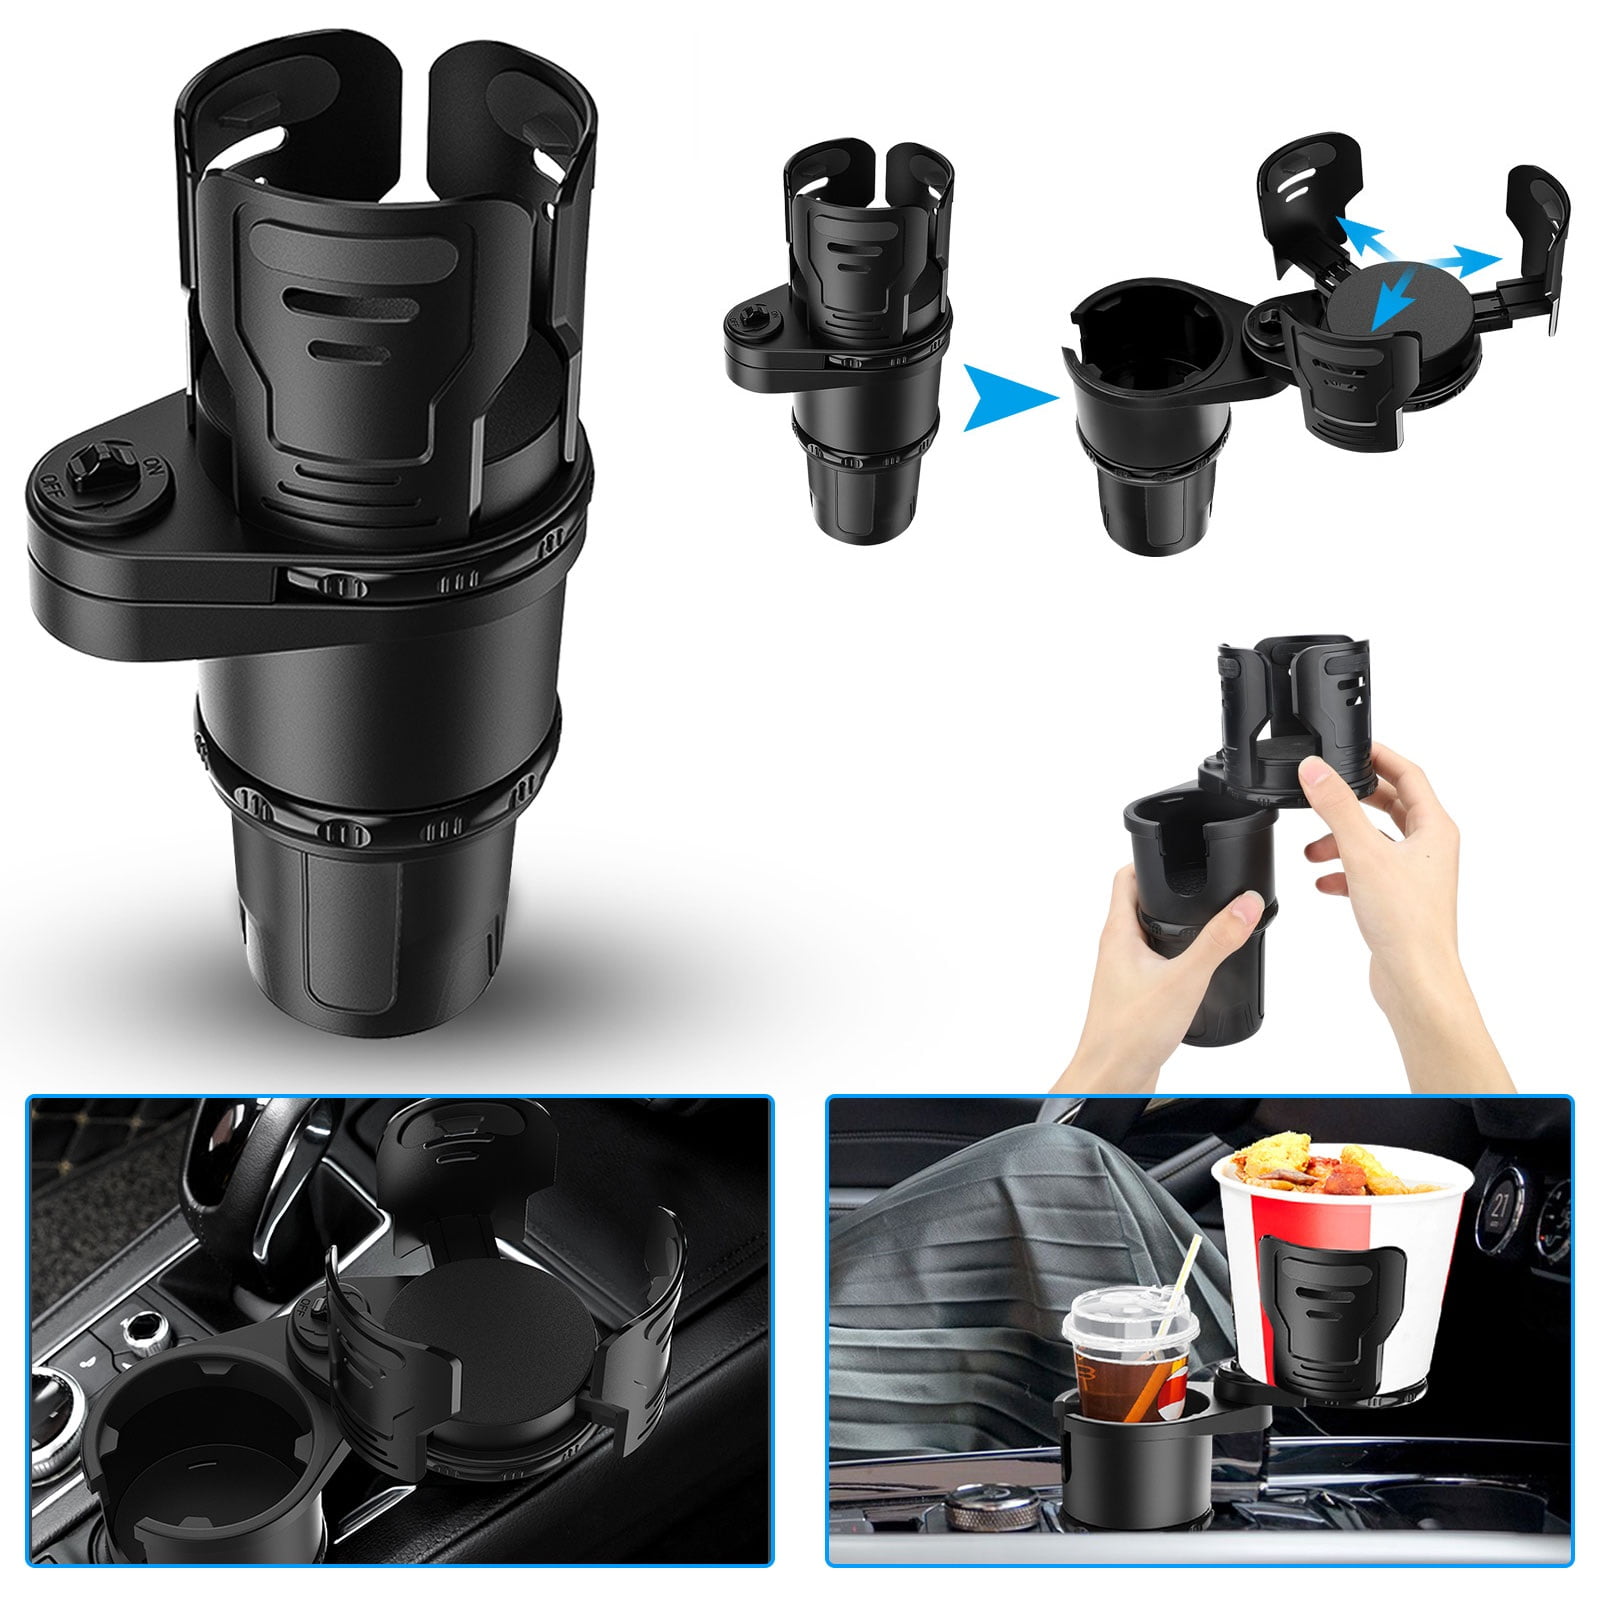 TSV Car Cup Holder Expander Adapter, Multifunctional Auto Cup